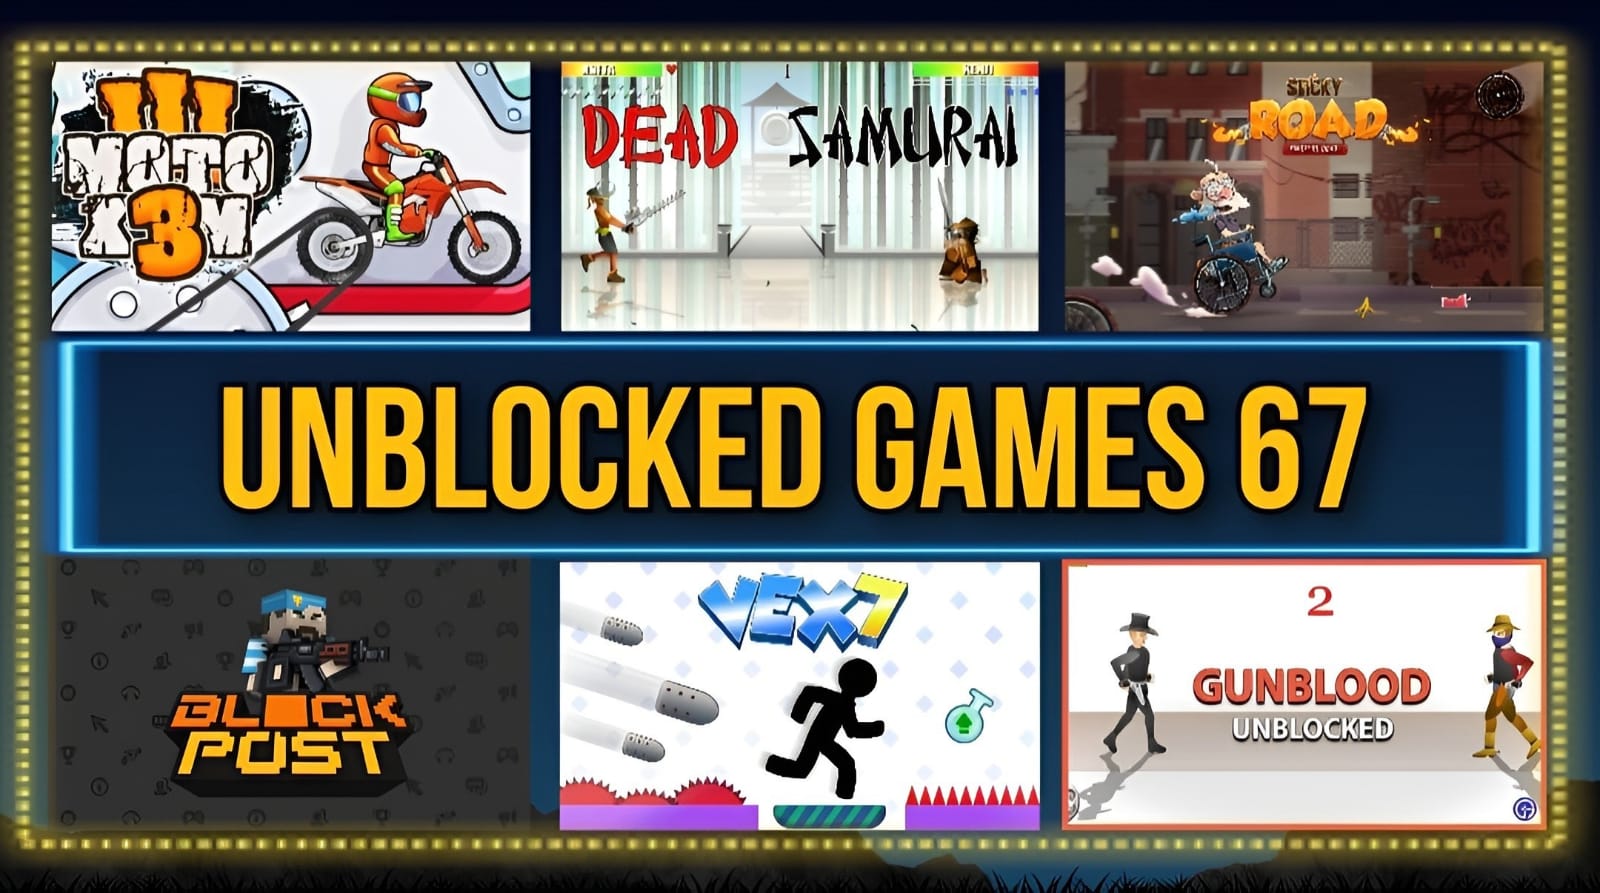 Play Amazing Unblocked Games 67 Without Blocking Your Network